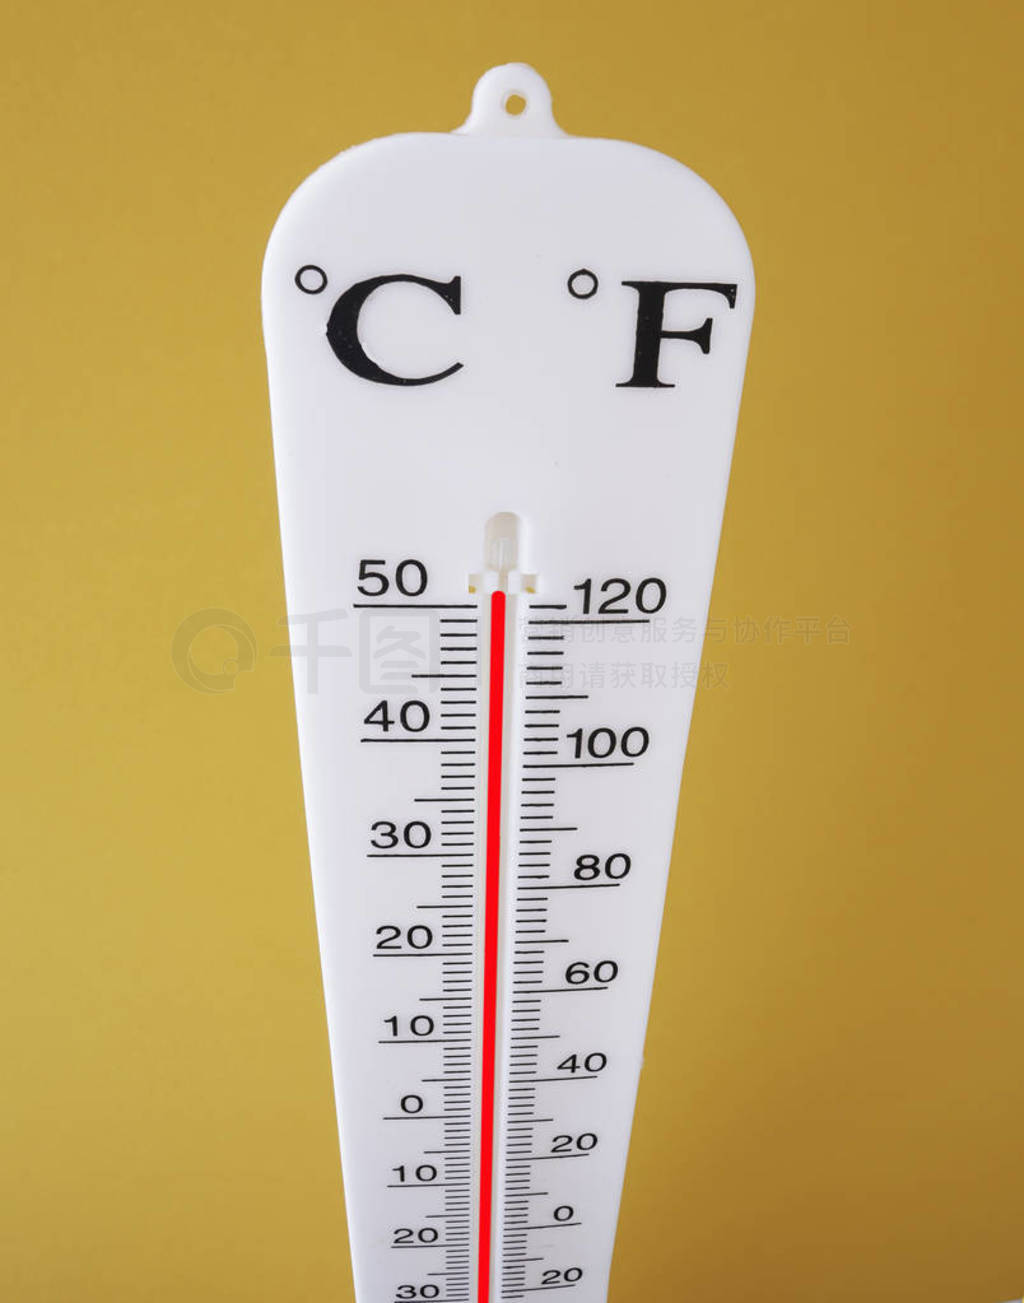 Thermometer shows an drastic increase in temperature conditions